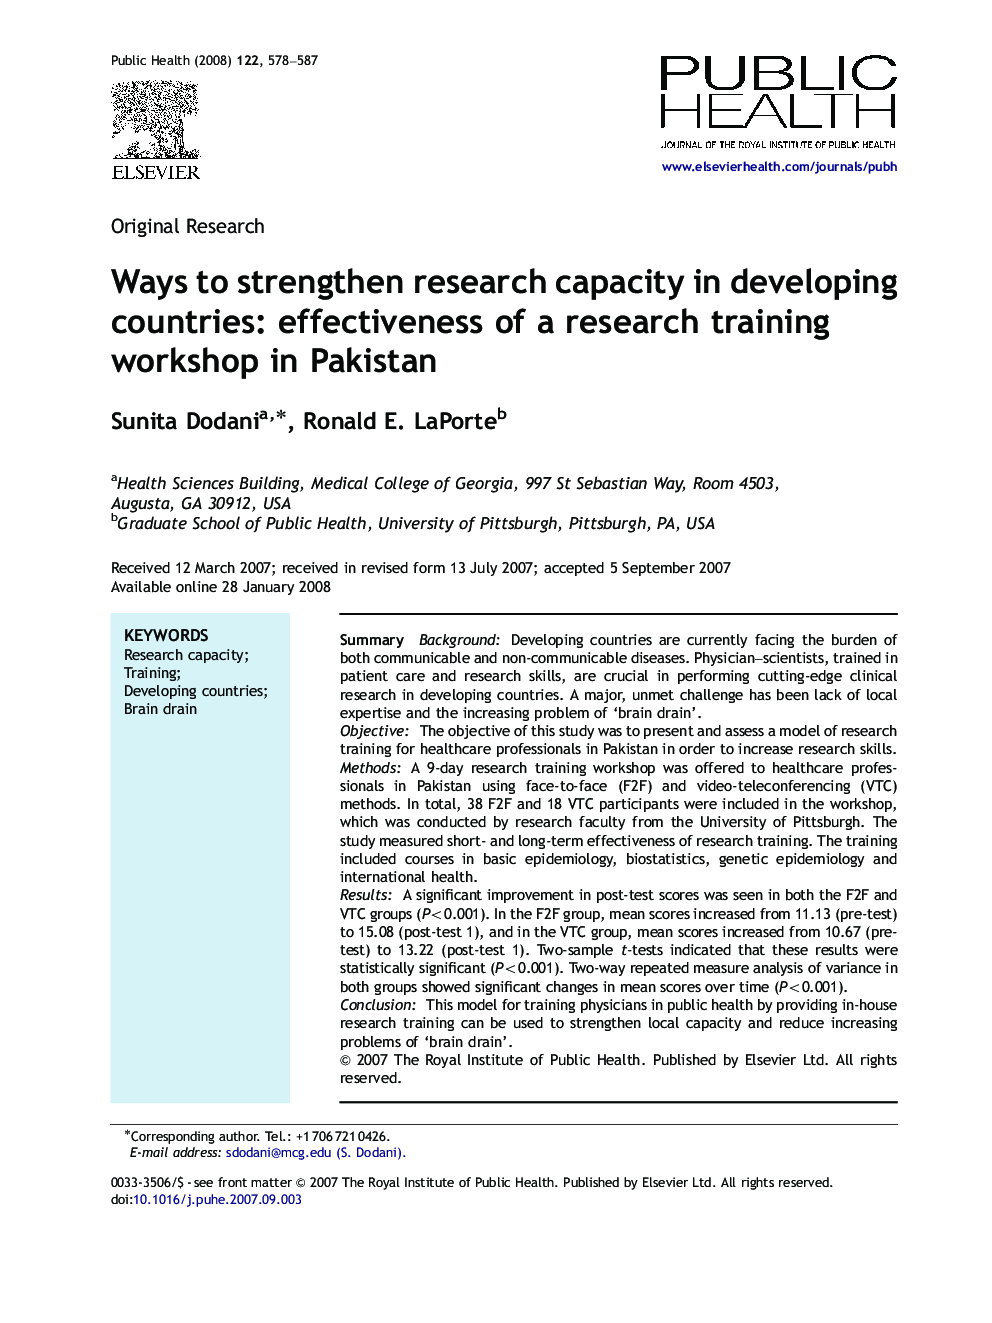 Ways to strengthen research capacity in developing countries: effectiveness of a research training workshop in Pakistan